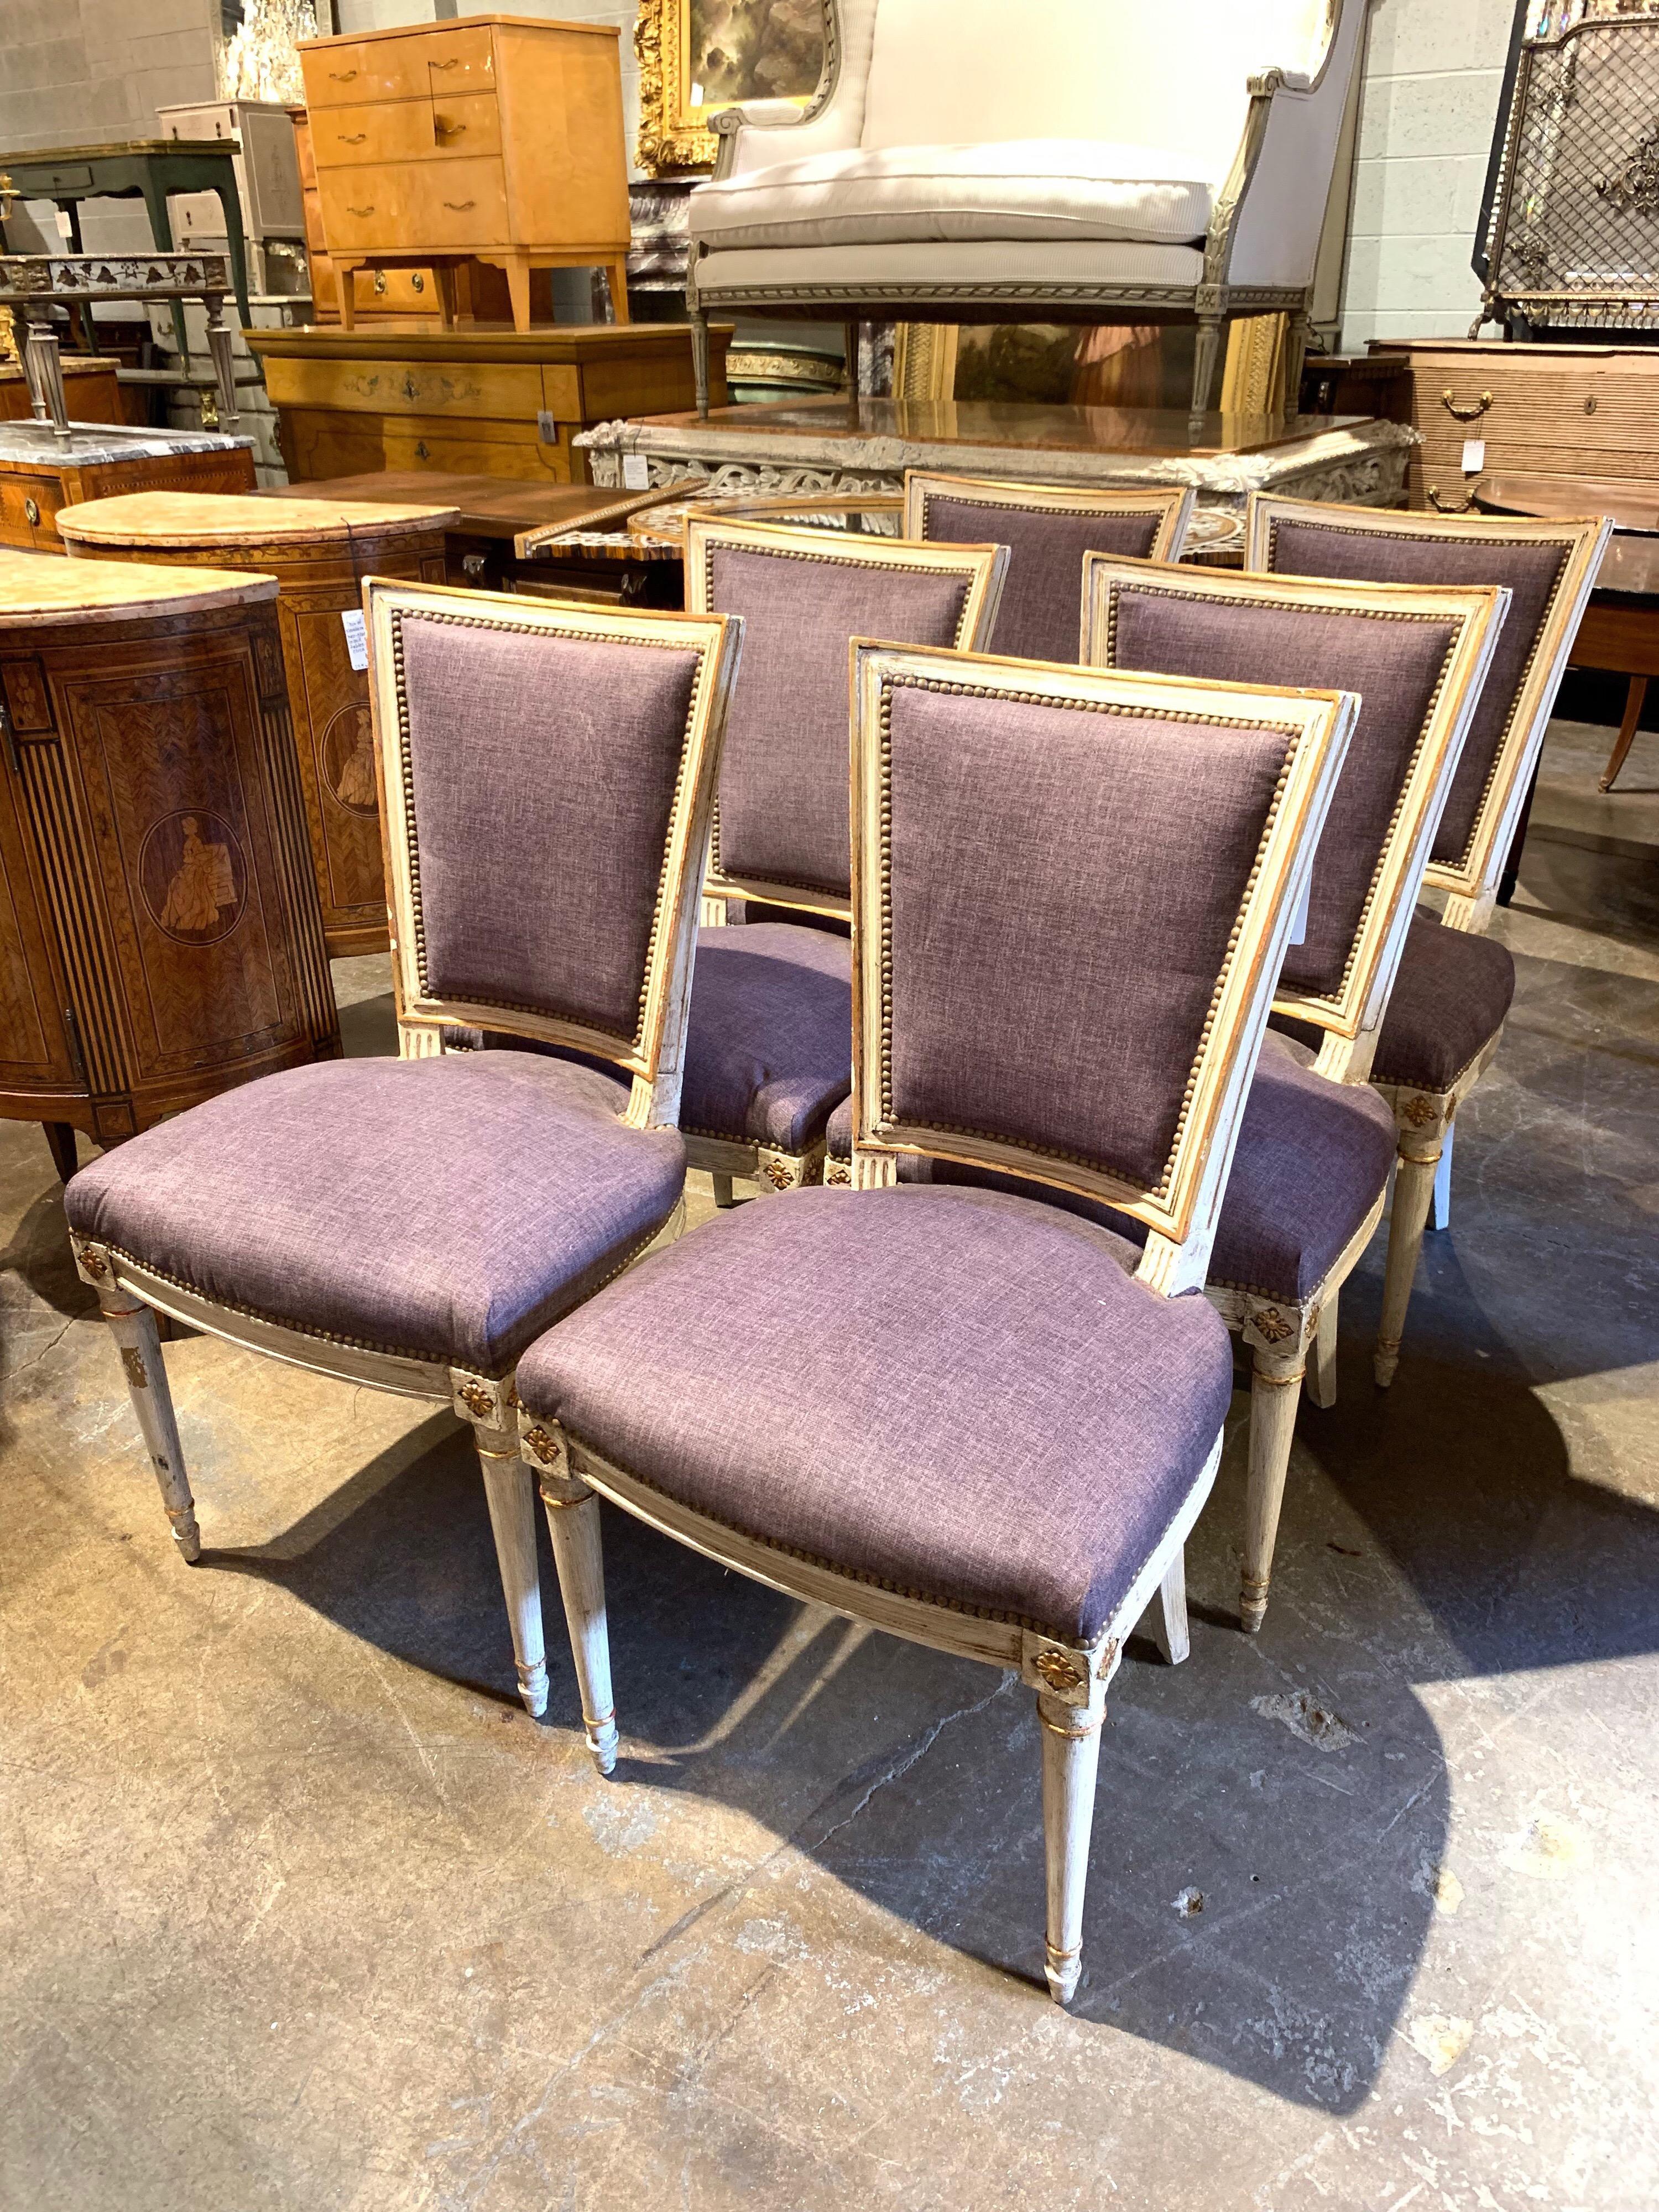 Beautiful set of 6 Jansen style lacquered dining chairs upholstered in purple velvet. Very nice look for a dining table and comfortable as well.